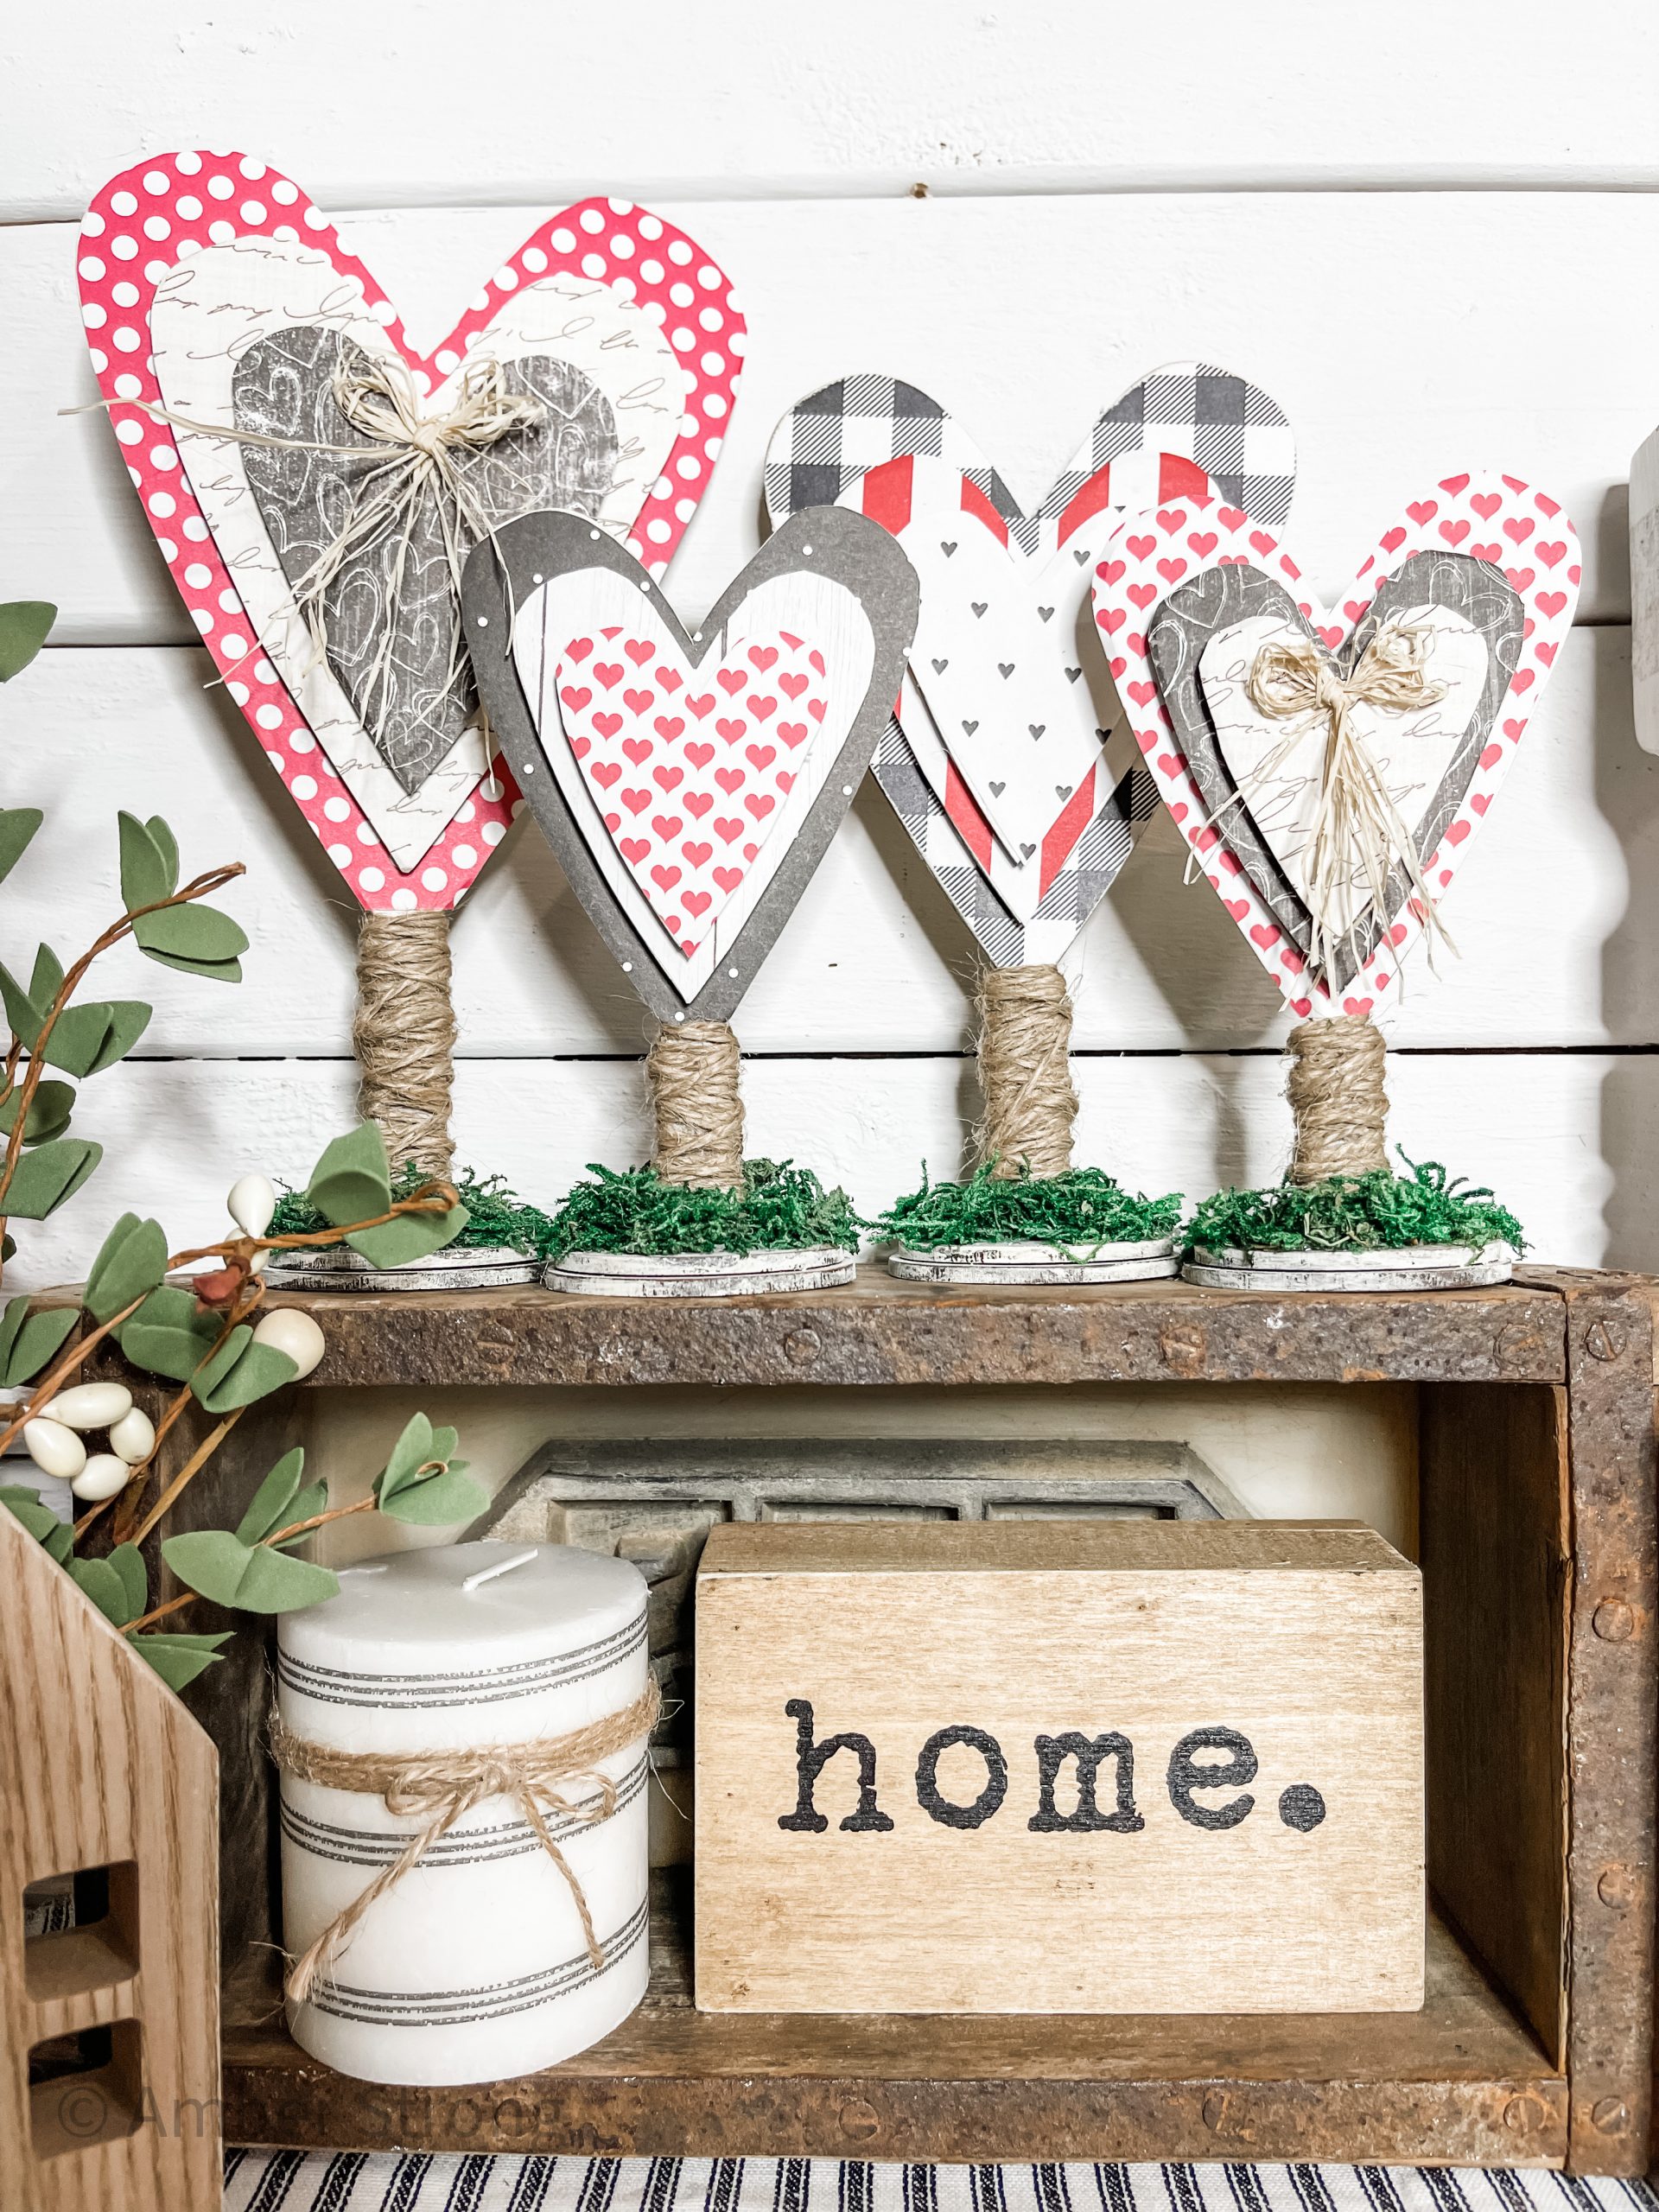 Cute Valentine Decor! Hearts for door. Made from purchased